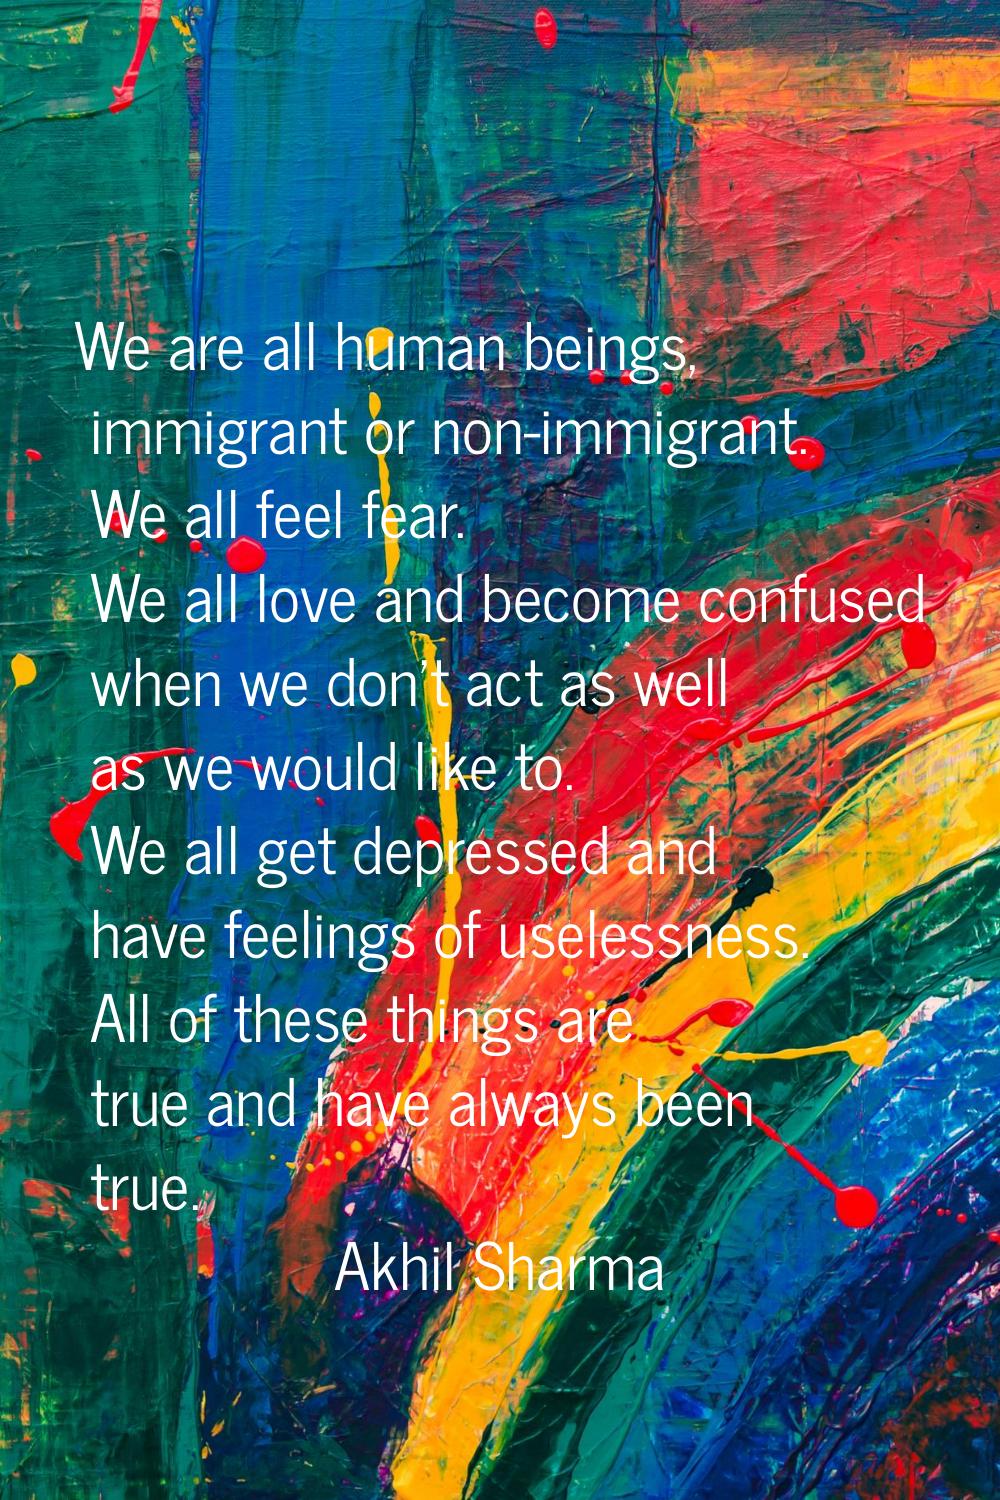 We are all human beings, immigrant or non-immigrant. We all feel fear. We all love and become confu